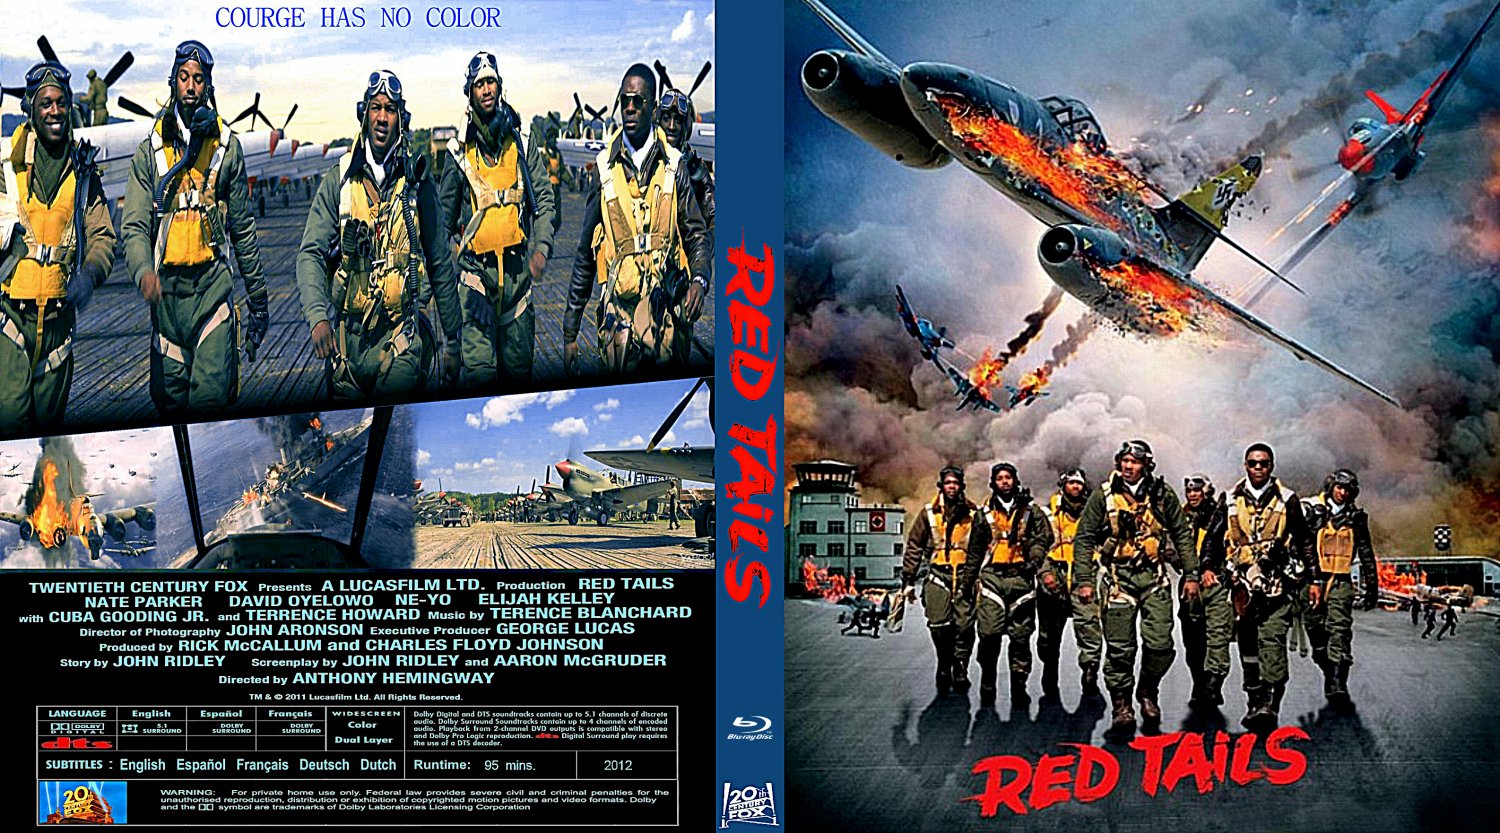 55 Top Photos Red Tails Movie Quotes - Red 2 Movie Quotes